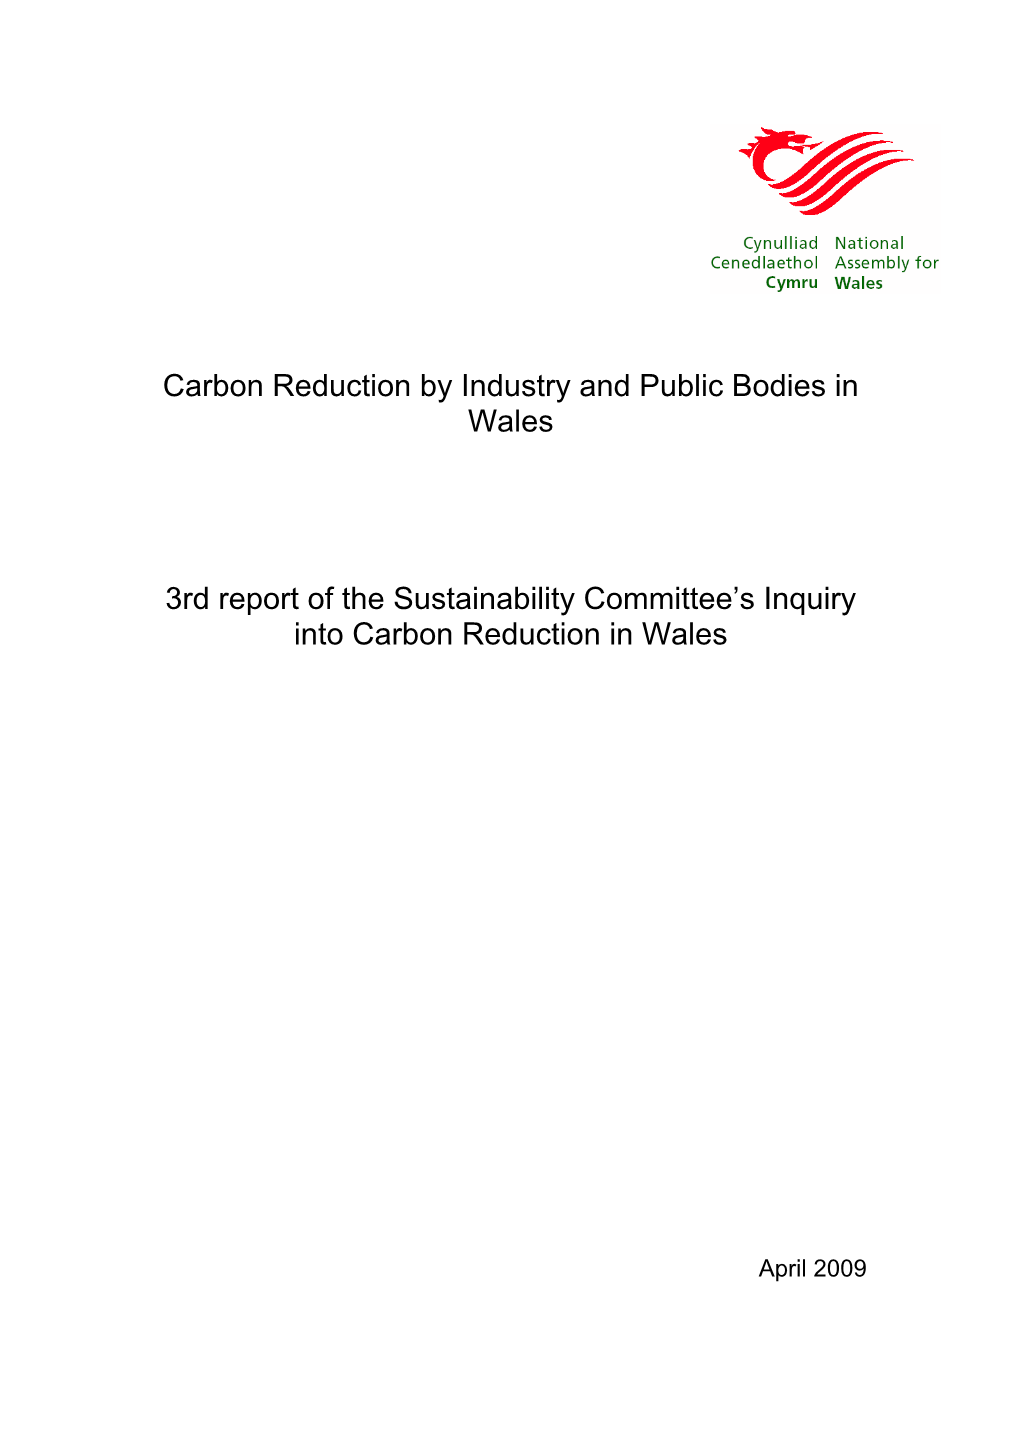 Chapter 3: Carbon Reduction by Industry 14 – 21